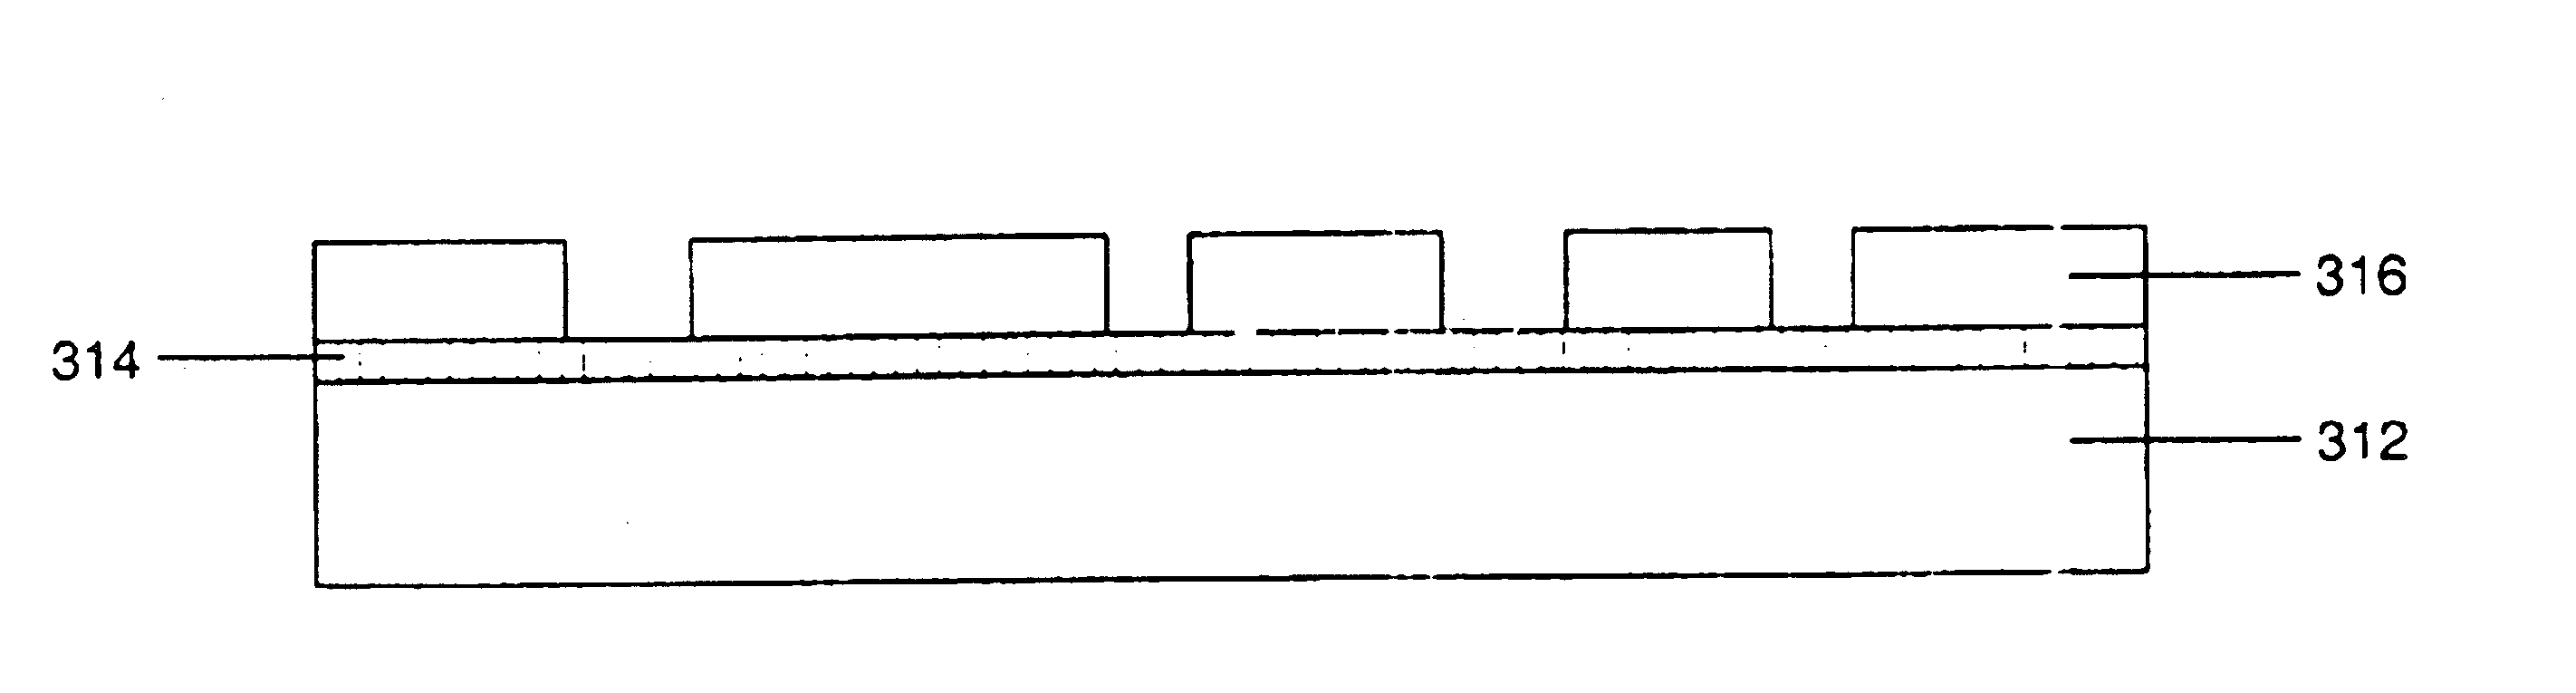 Methods of manufacturing a lithography template